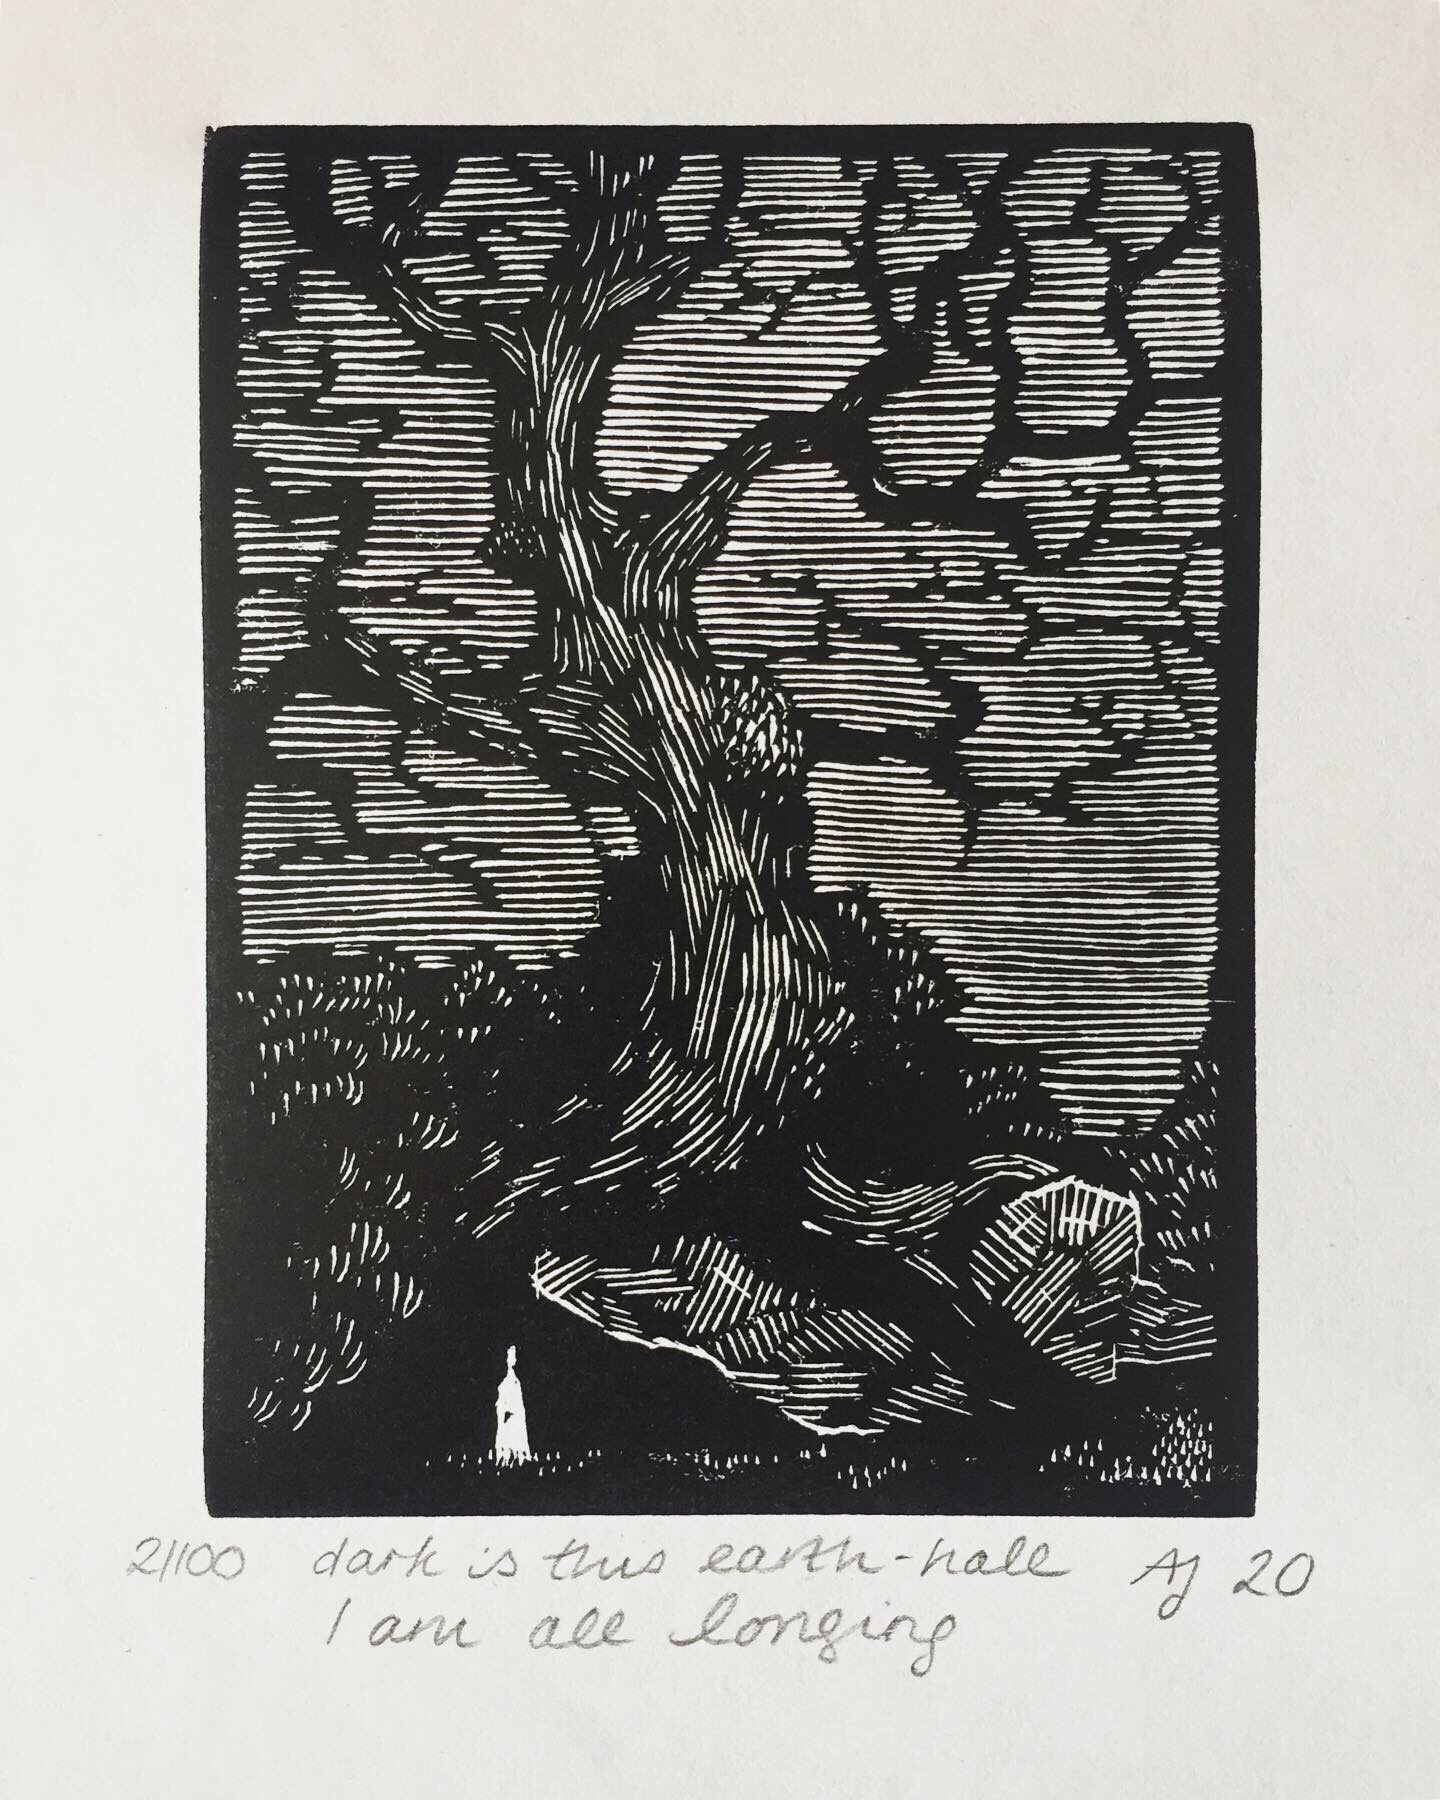 Wood engraving of a tree